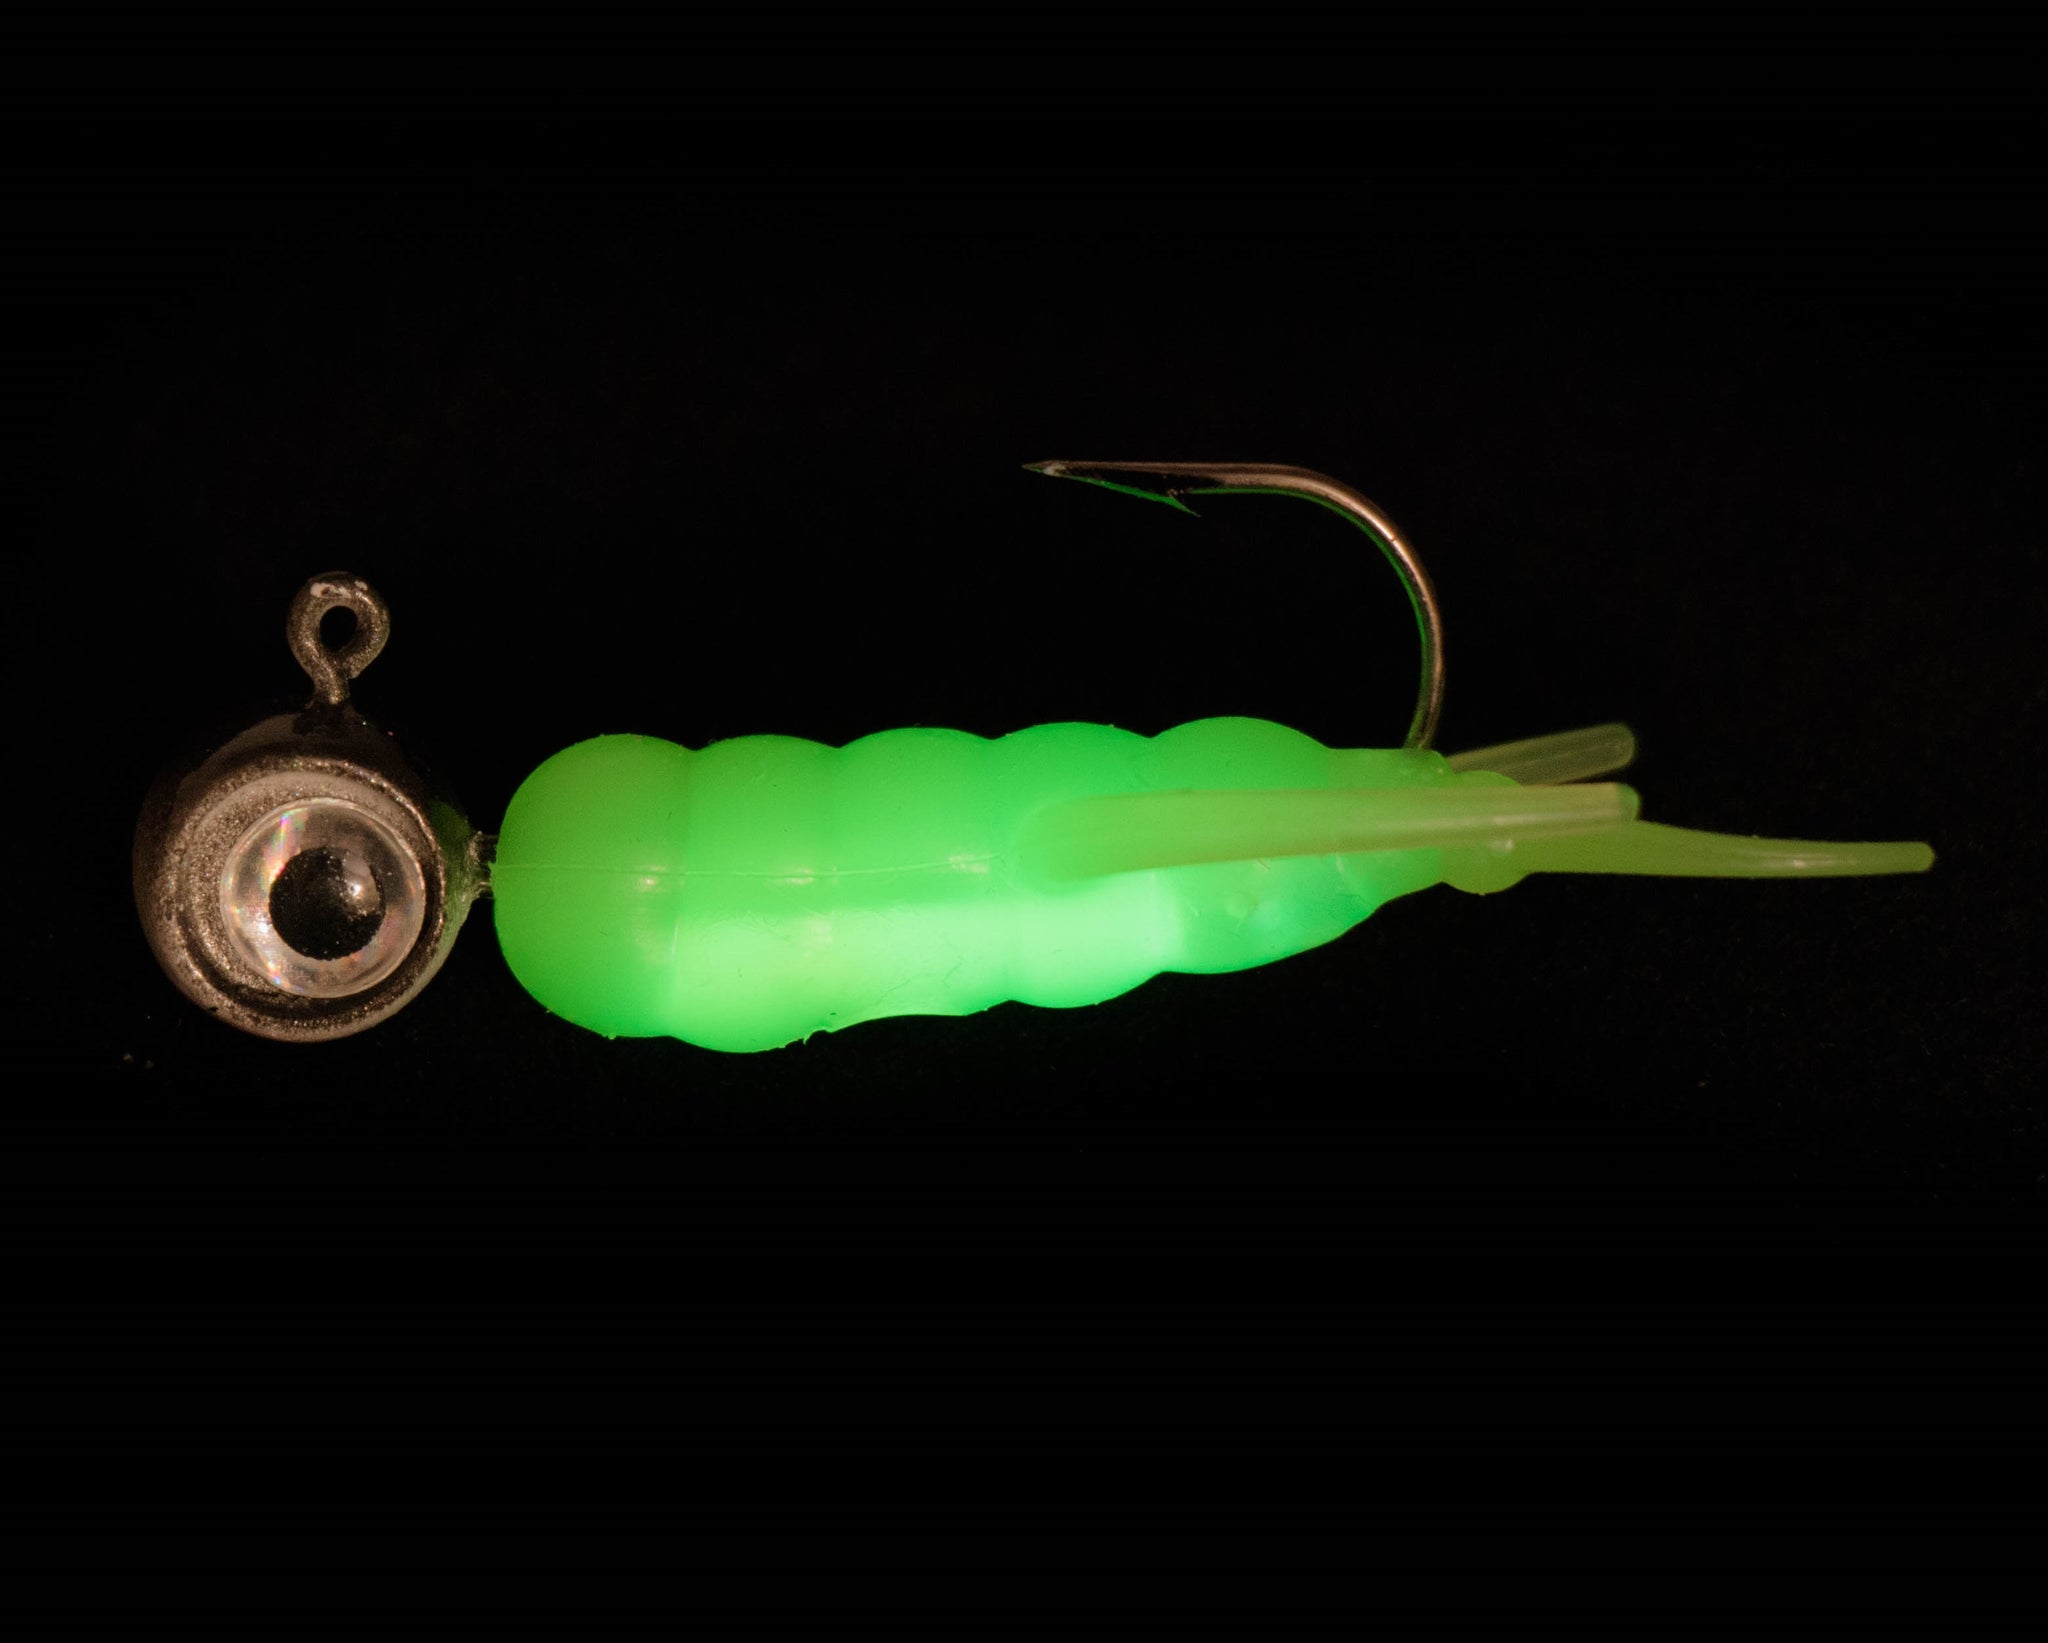 Fishing Grubs 1.5” long (4 pack) - Glows in the dark, Soft plastic,  Internal scent pocket.